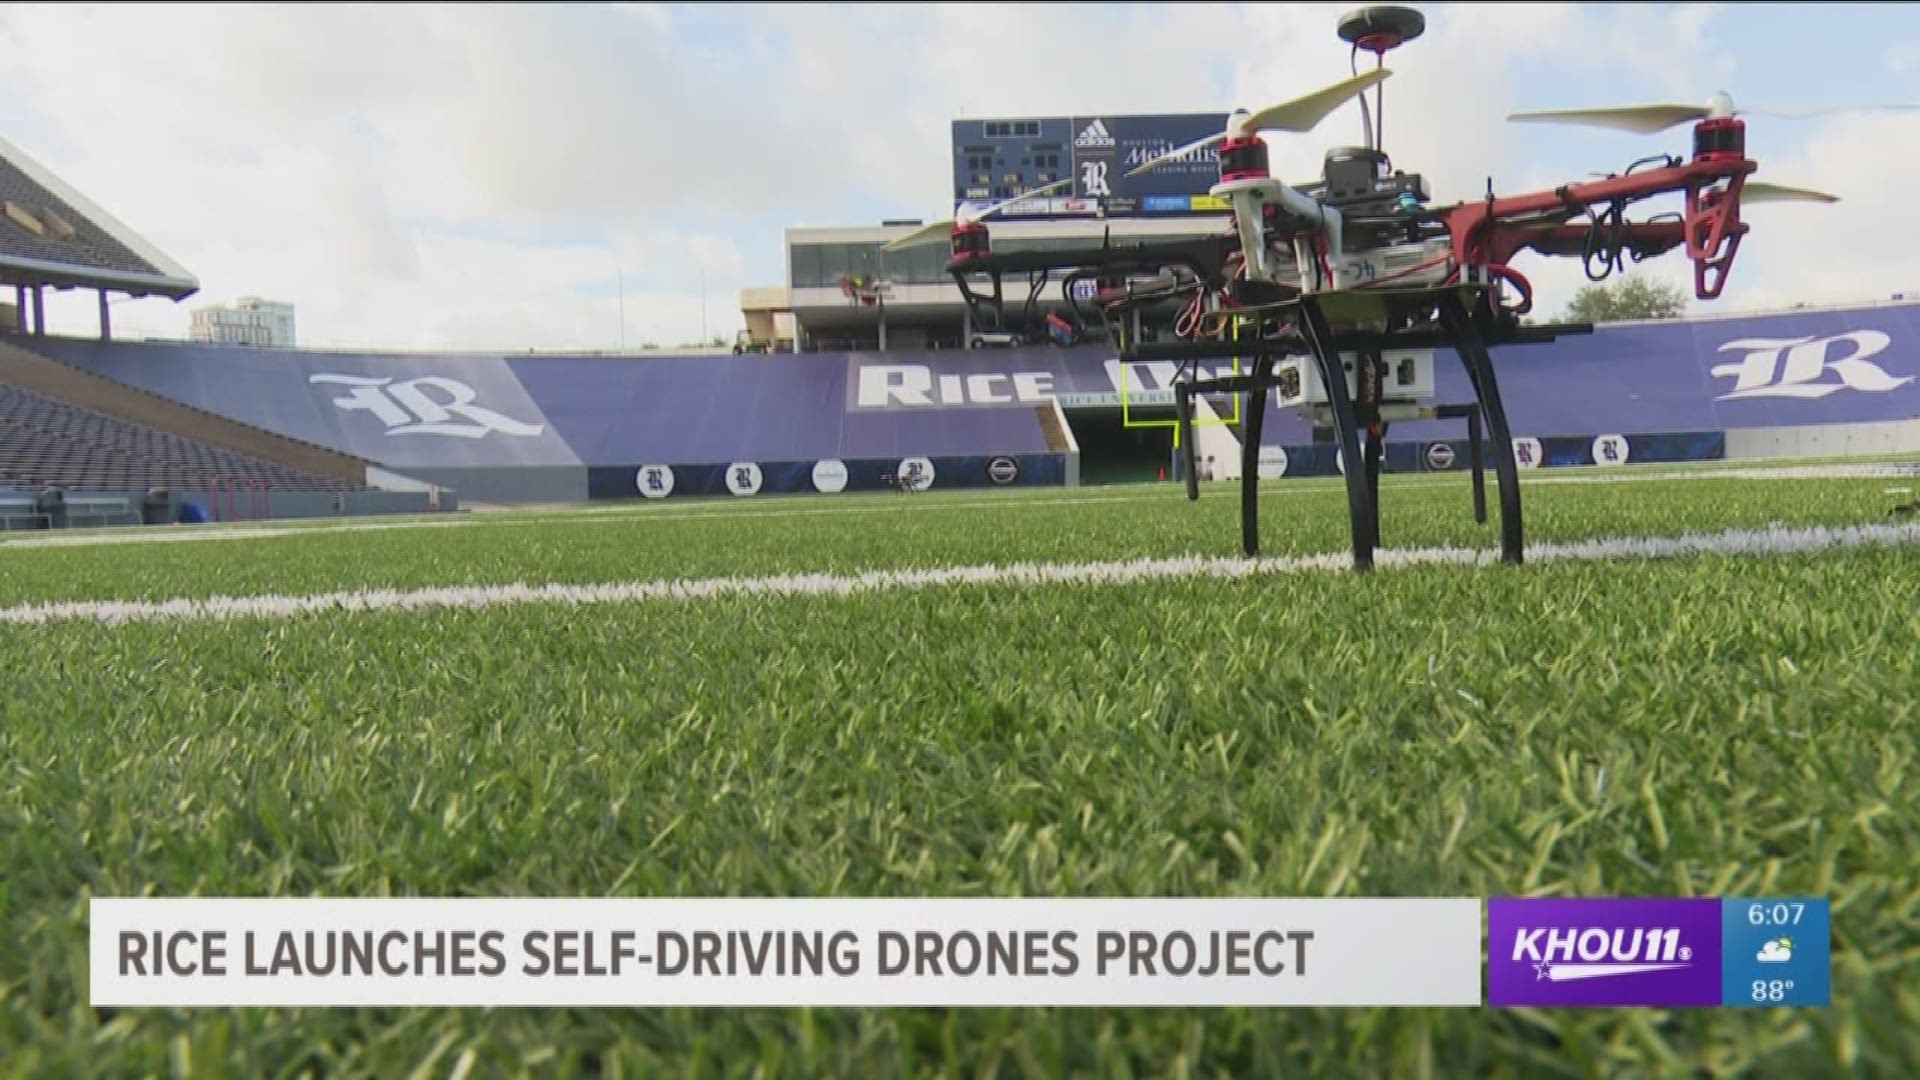 On Friday Sept. 7, researchers at the university used the school's stadium to fly and test the drones.